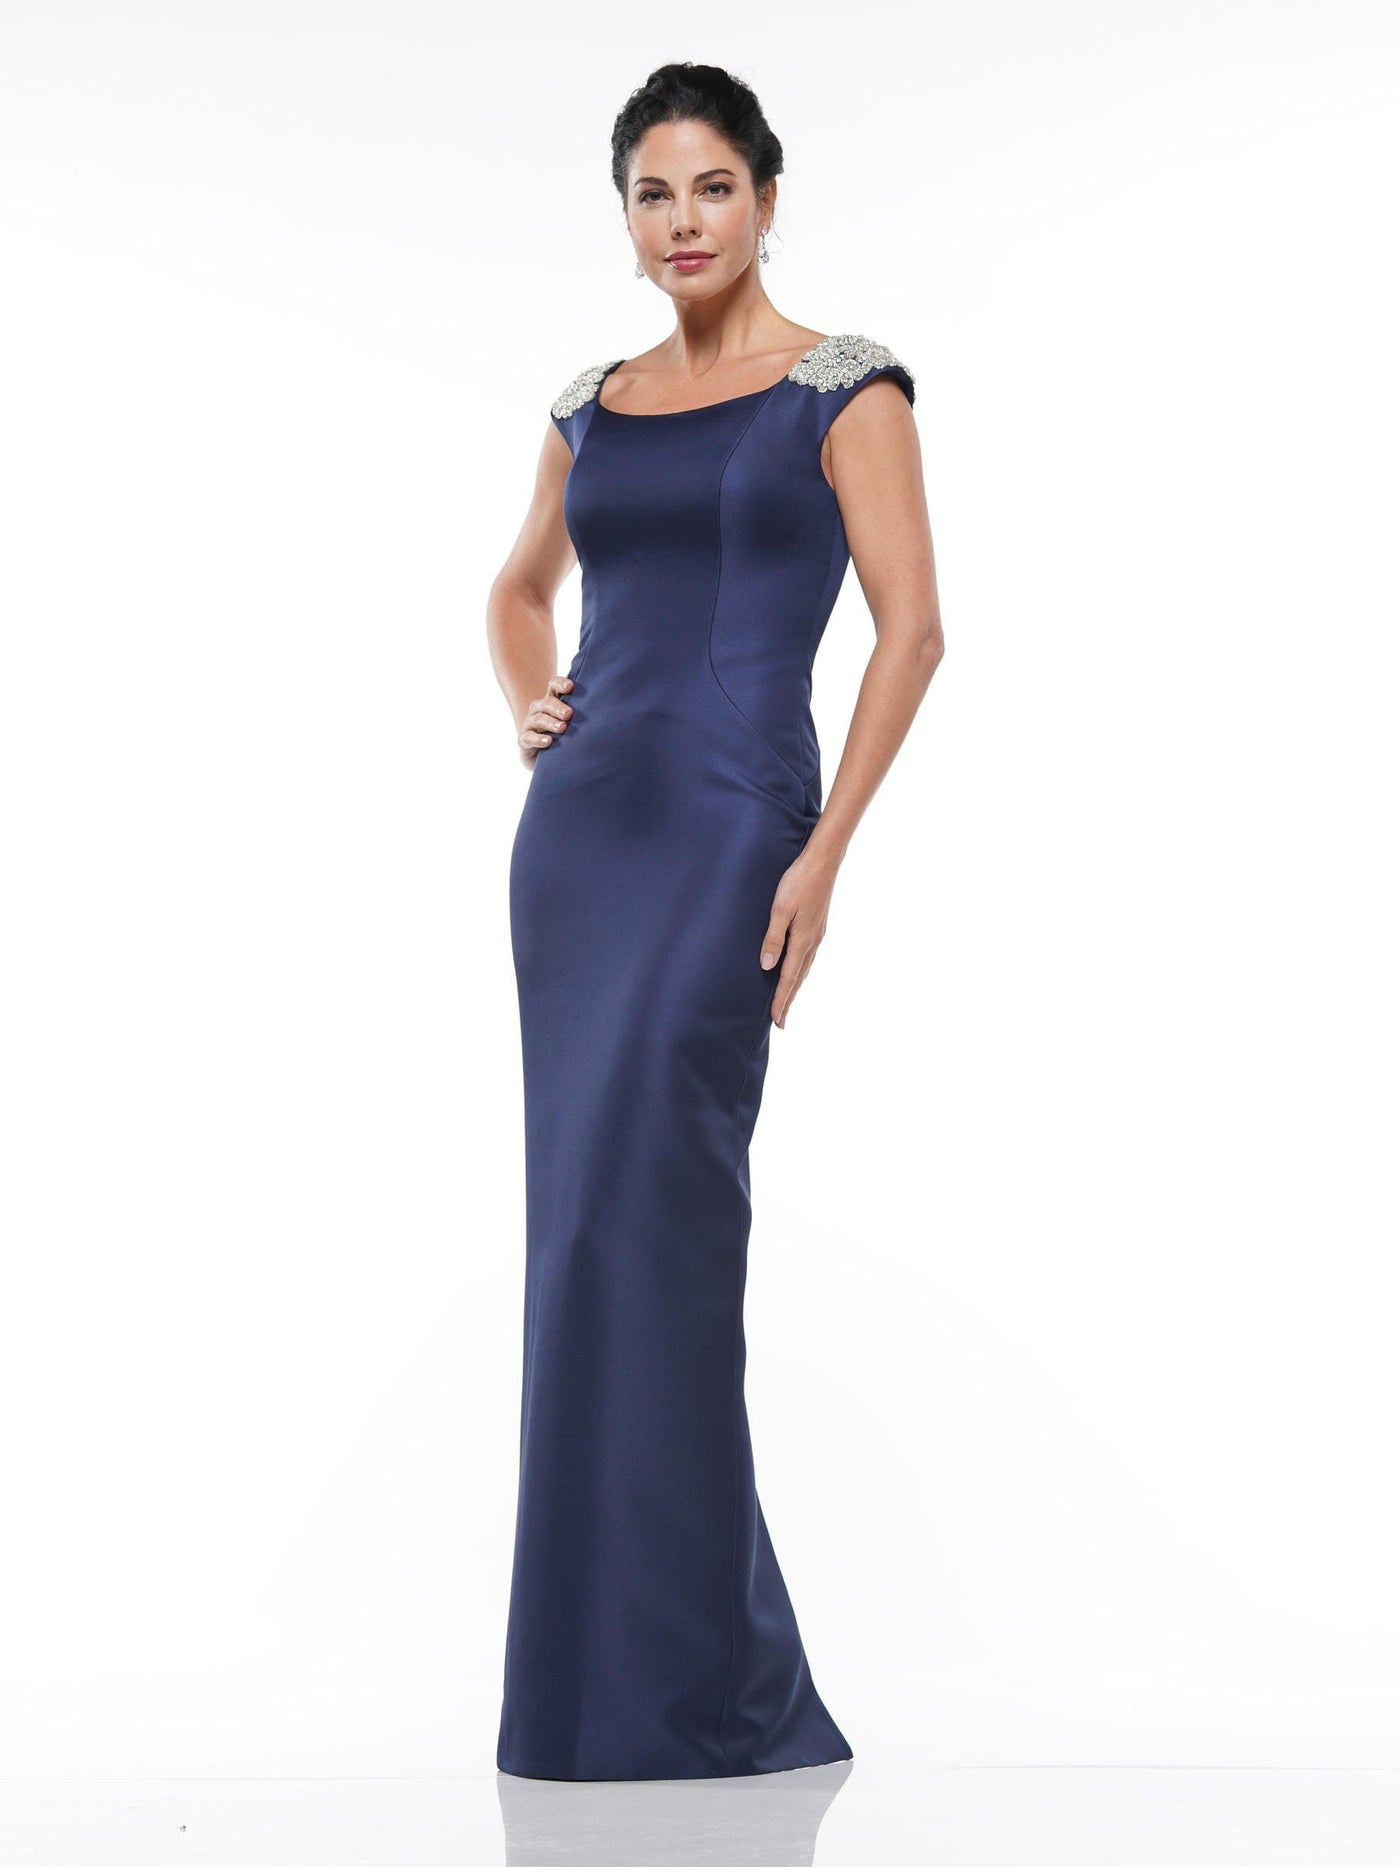 Marsoni By Colors - MV1004 Jewel Beaded Shoulders Satin Column Gown Mother of the Bride Dresses 4 / Navy